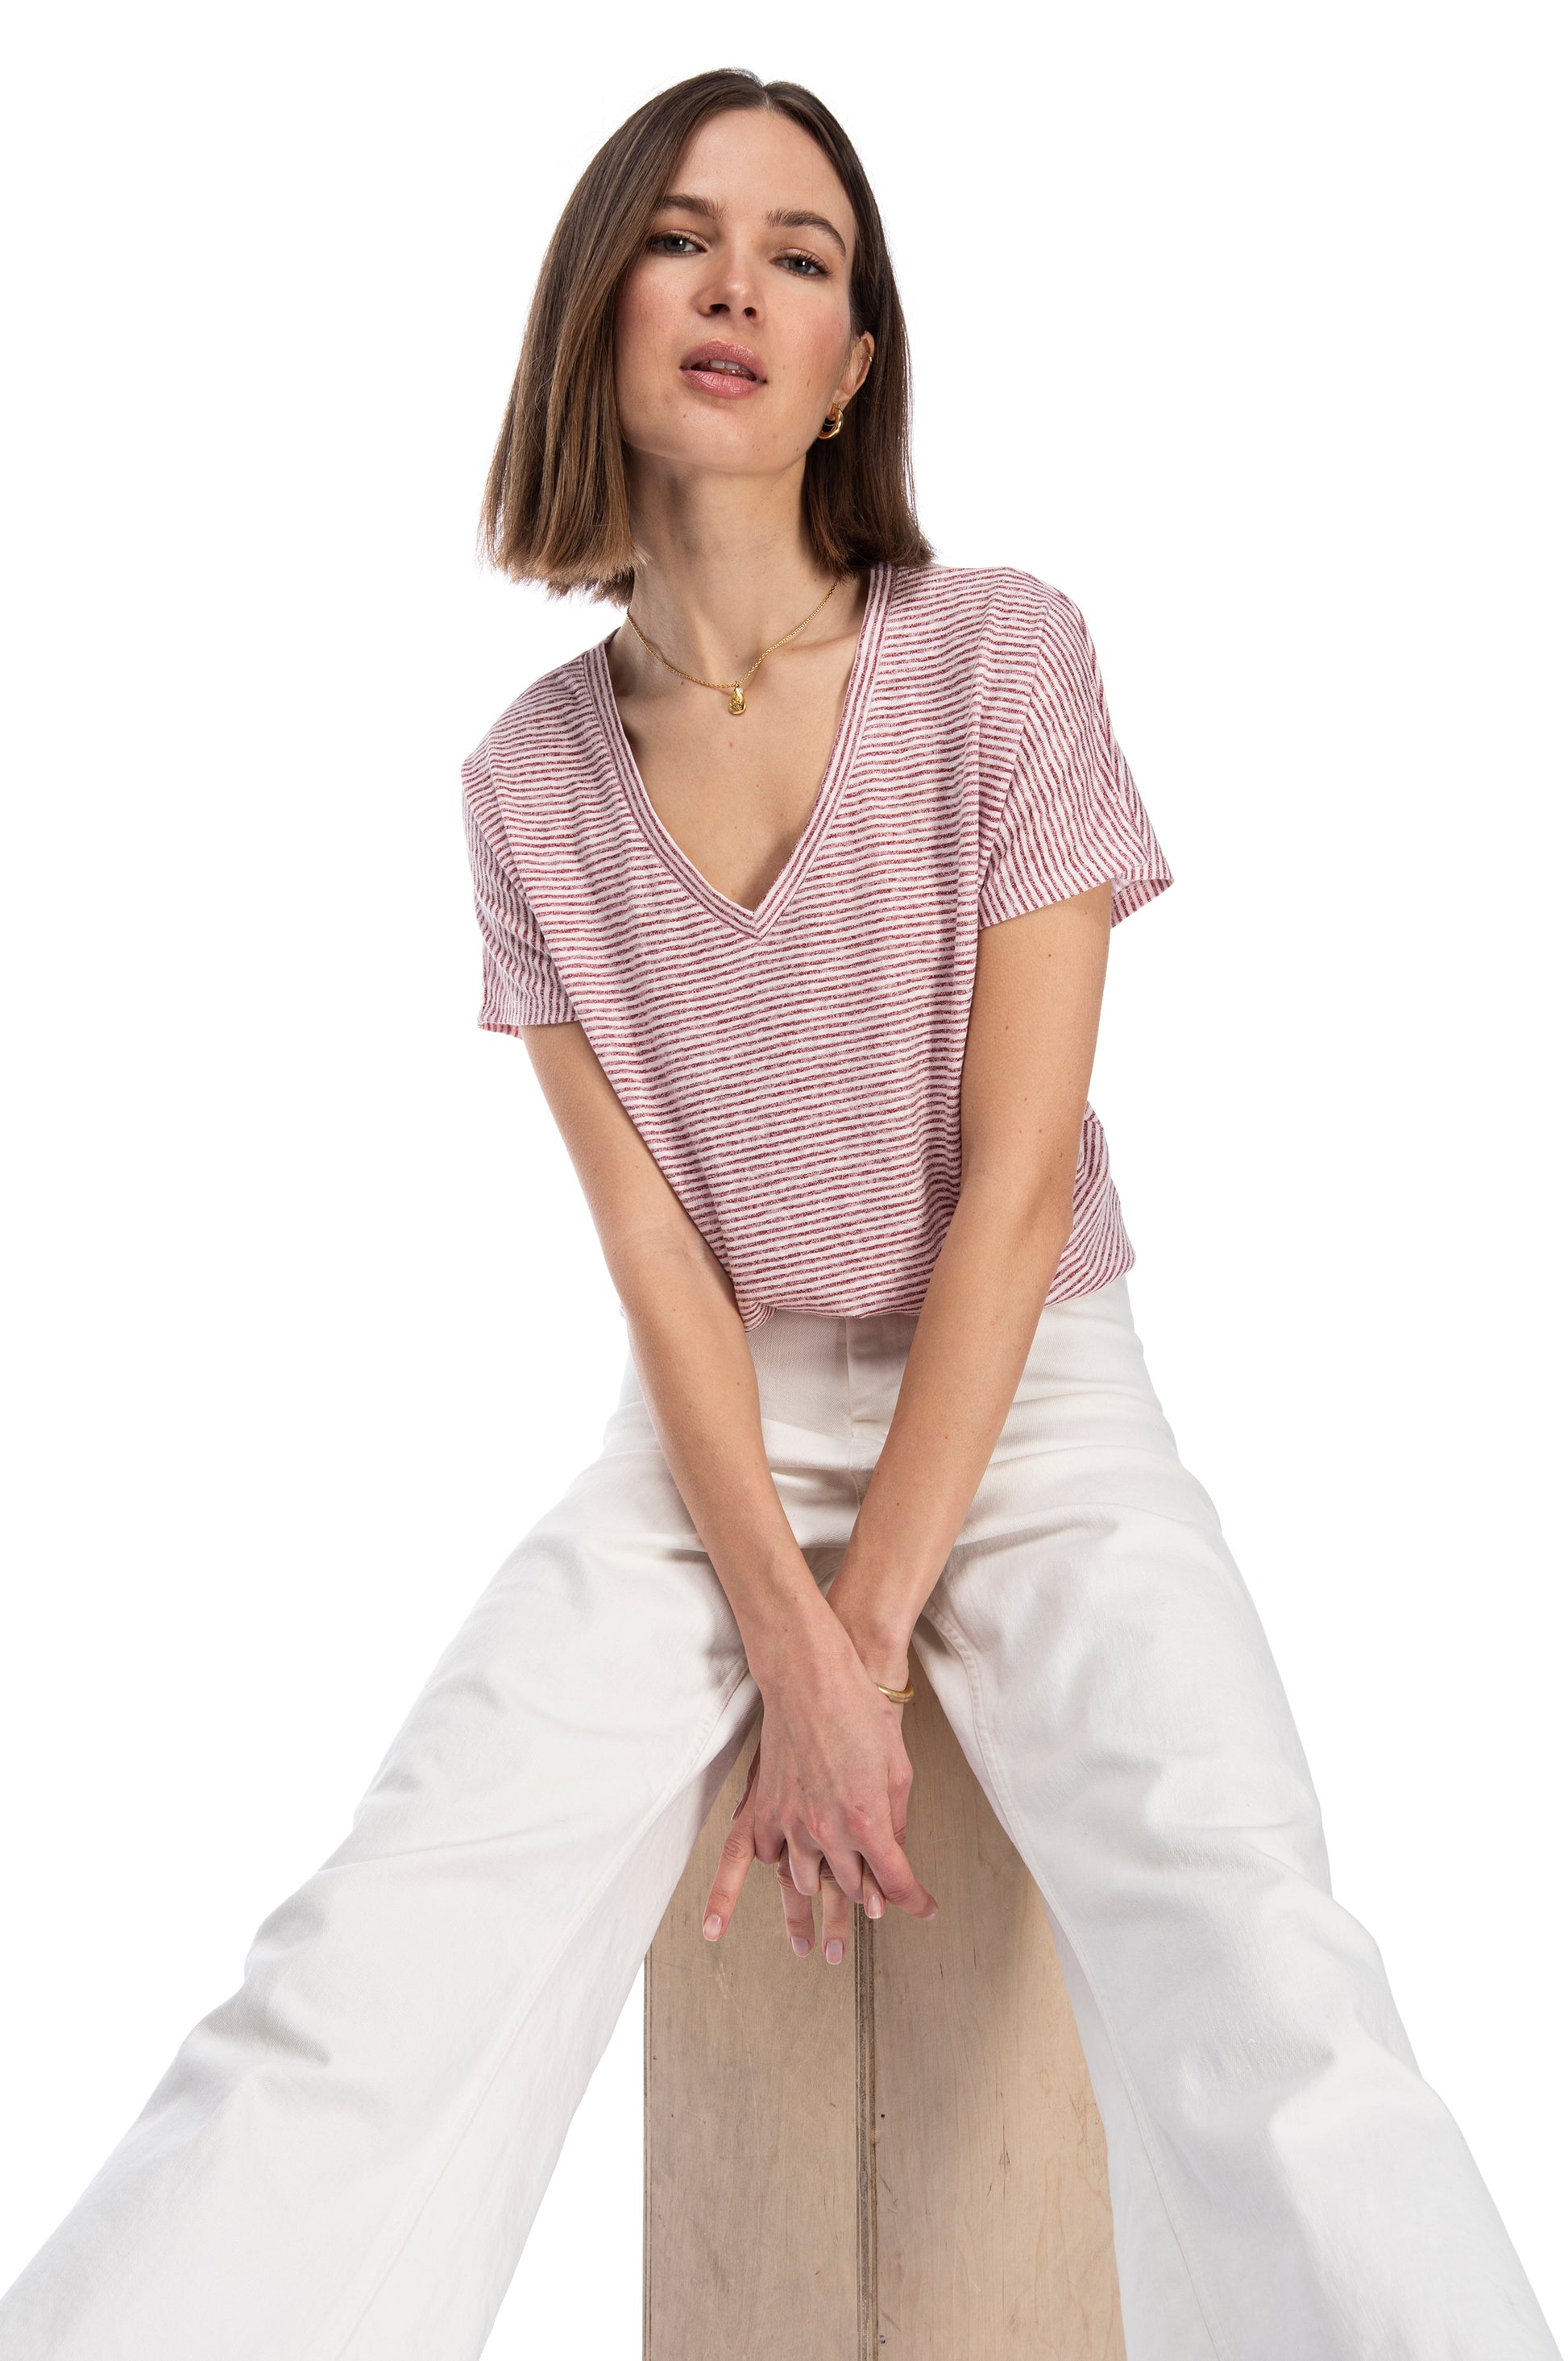 Confident woman in a stylish CATY RELAXED TEE by B Collection by Bobeau and white pants posing casually while seated on a wooden stool against a white background.